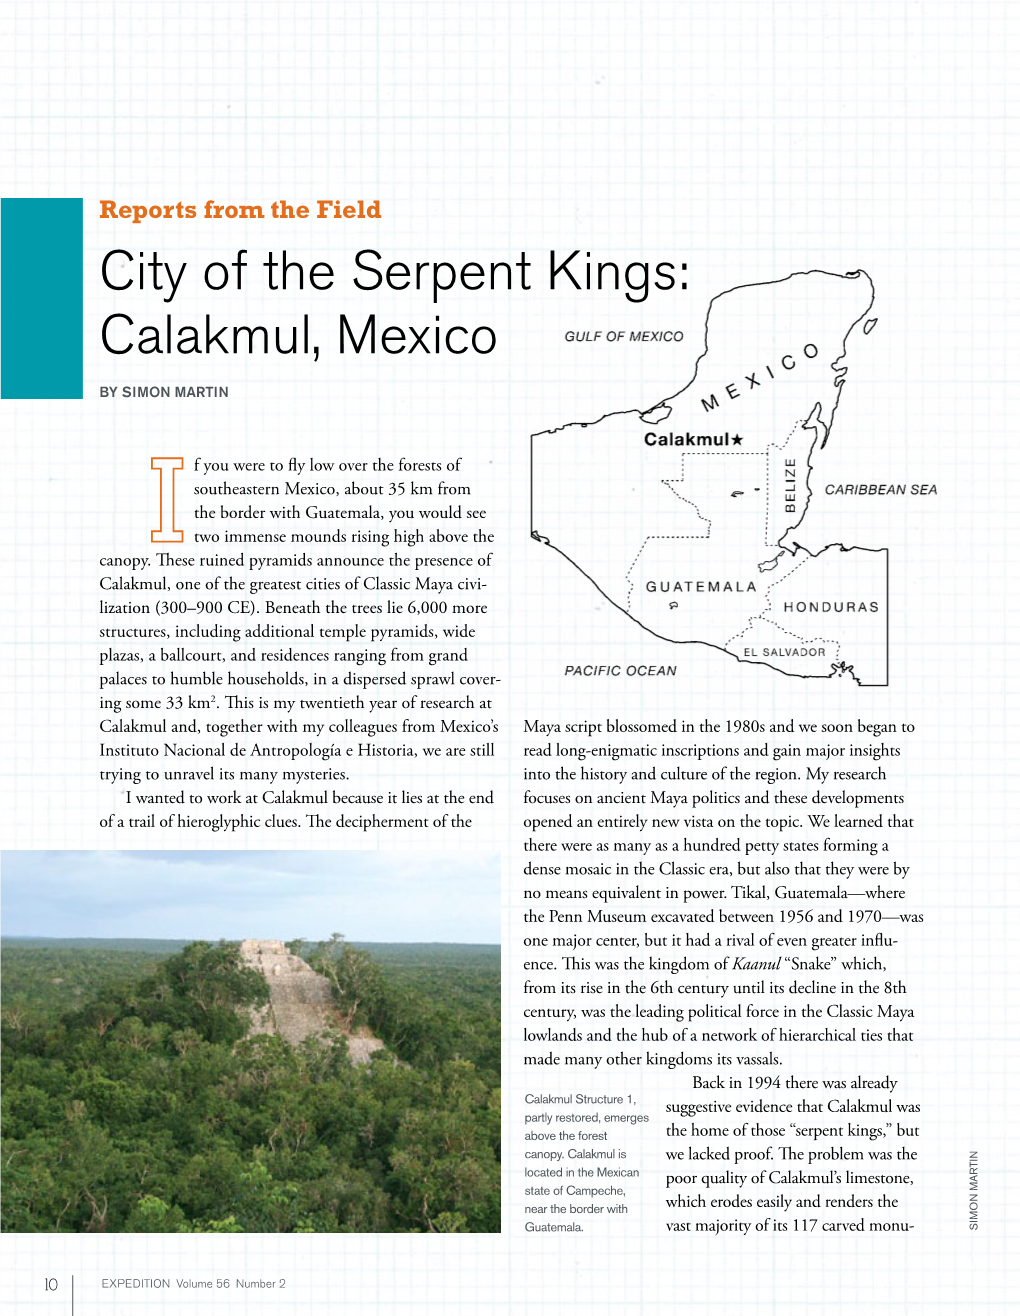 City of the Serpent Kings: Calakmul, Mexico